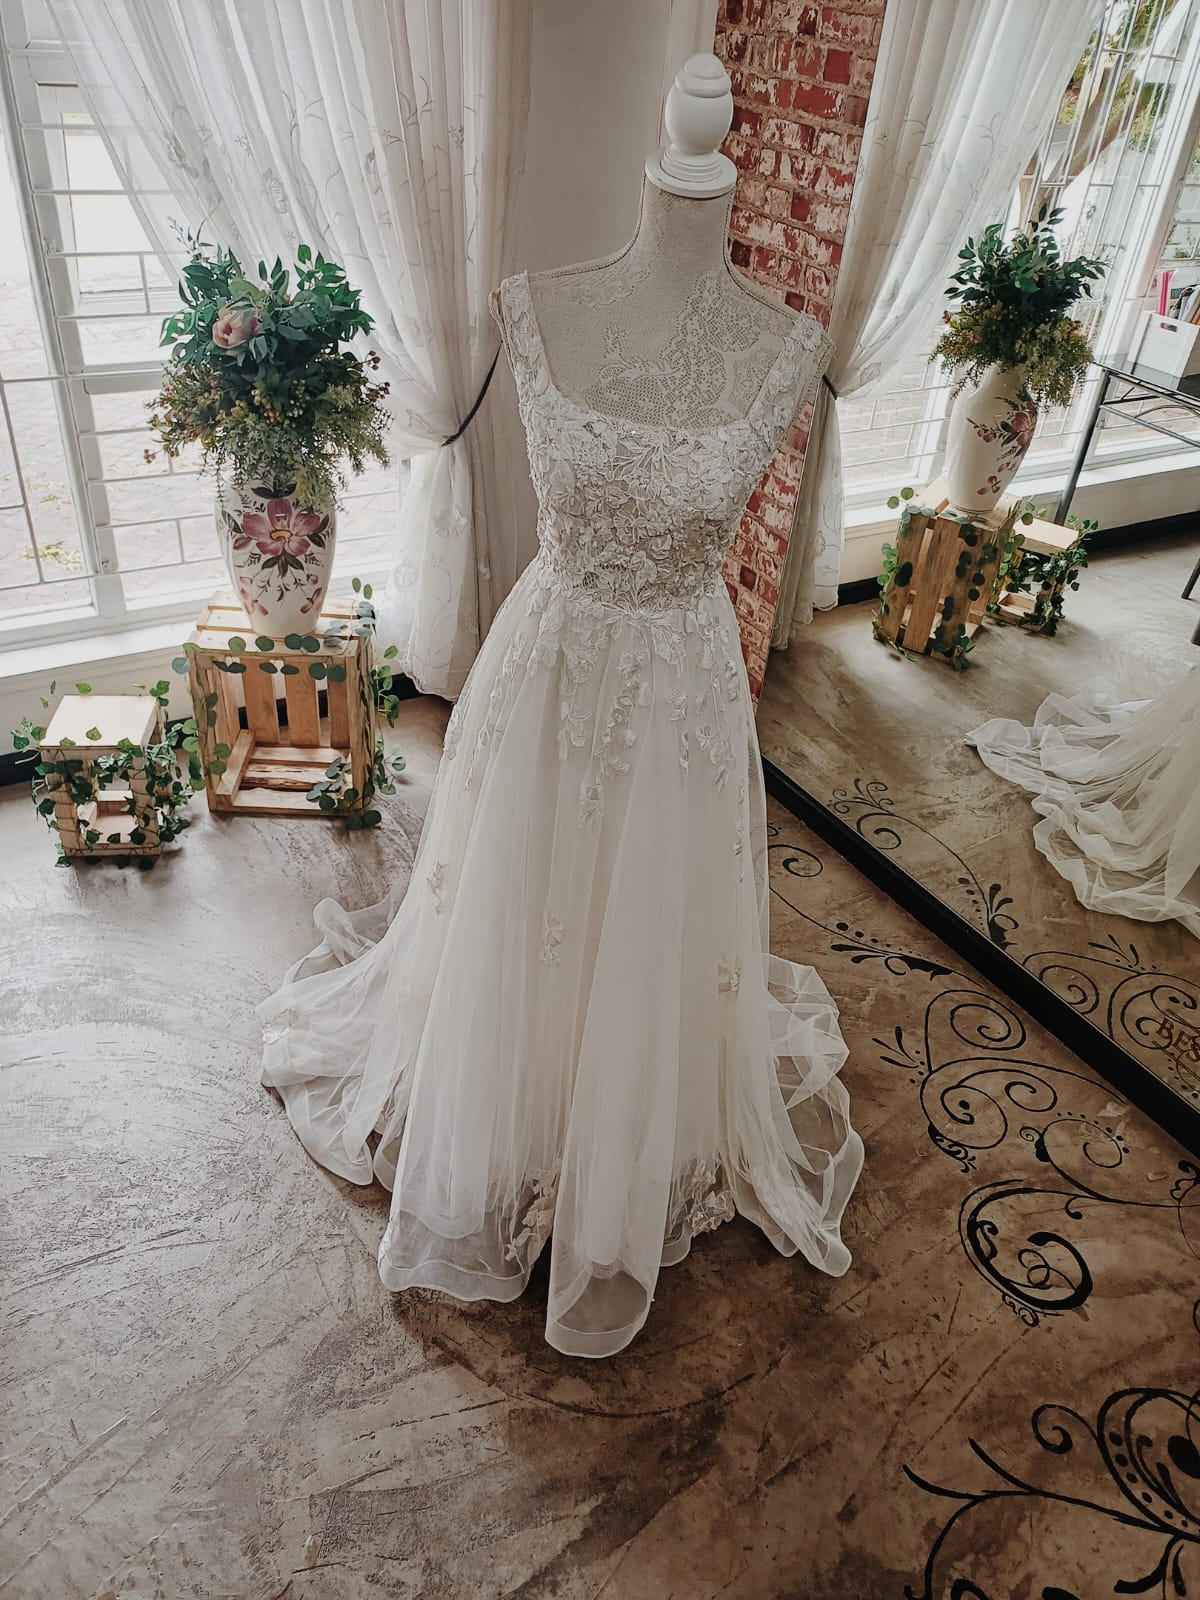 HIRE BRIDAL GOWN - HF4191 - ELEVATE YOUR BRIDAL LOOK WITH A BATEAU NECKLINE LACE BODICE AND A BLUSH TULLE PRINCESS BALL GOWN SKIRT. THIS COMBINATION EXUDES A SENSE OF CLASSIC ELEGANCE AND ROMANCE FOR YOUR SPECIAL DAY.